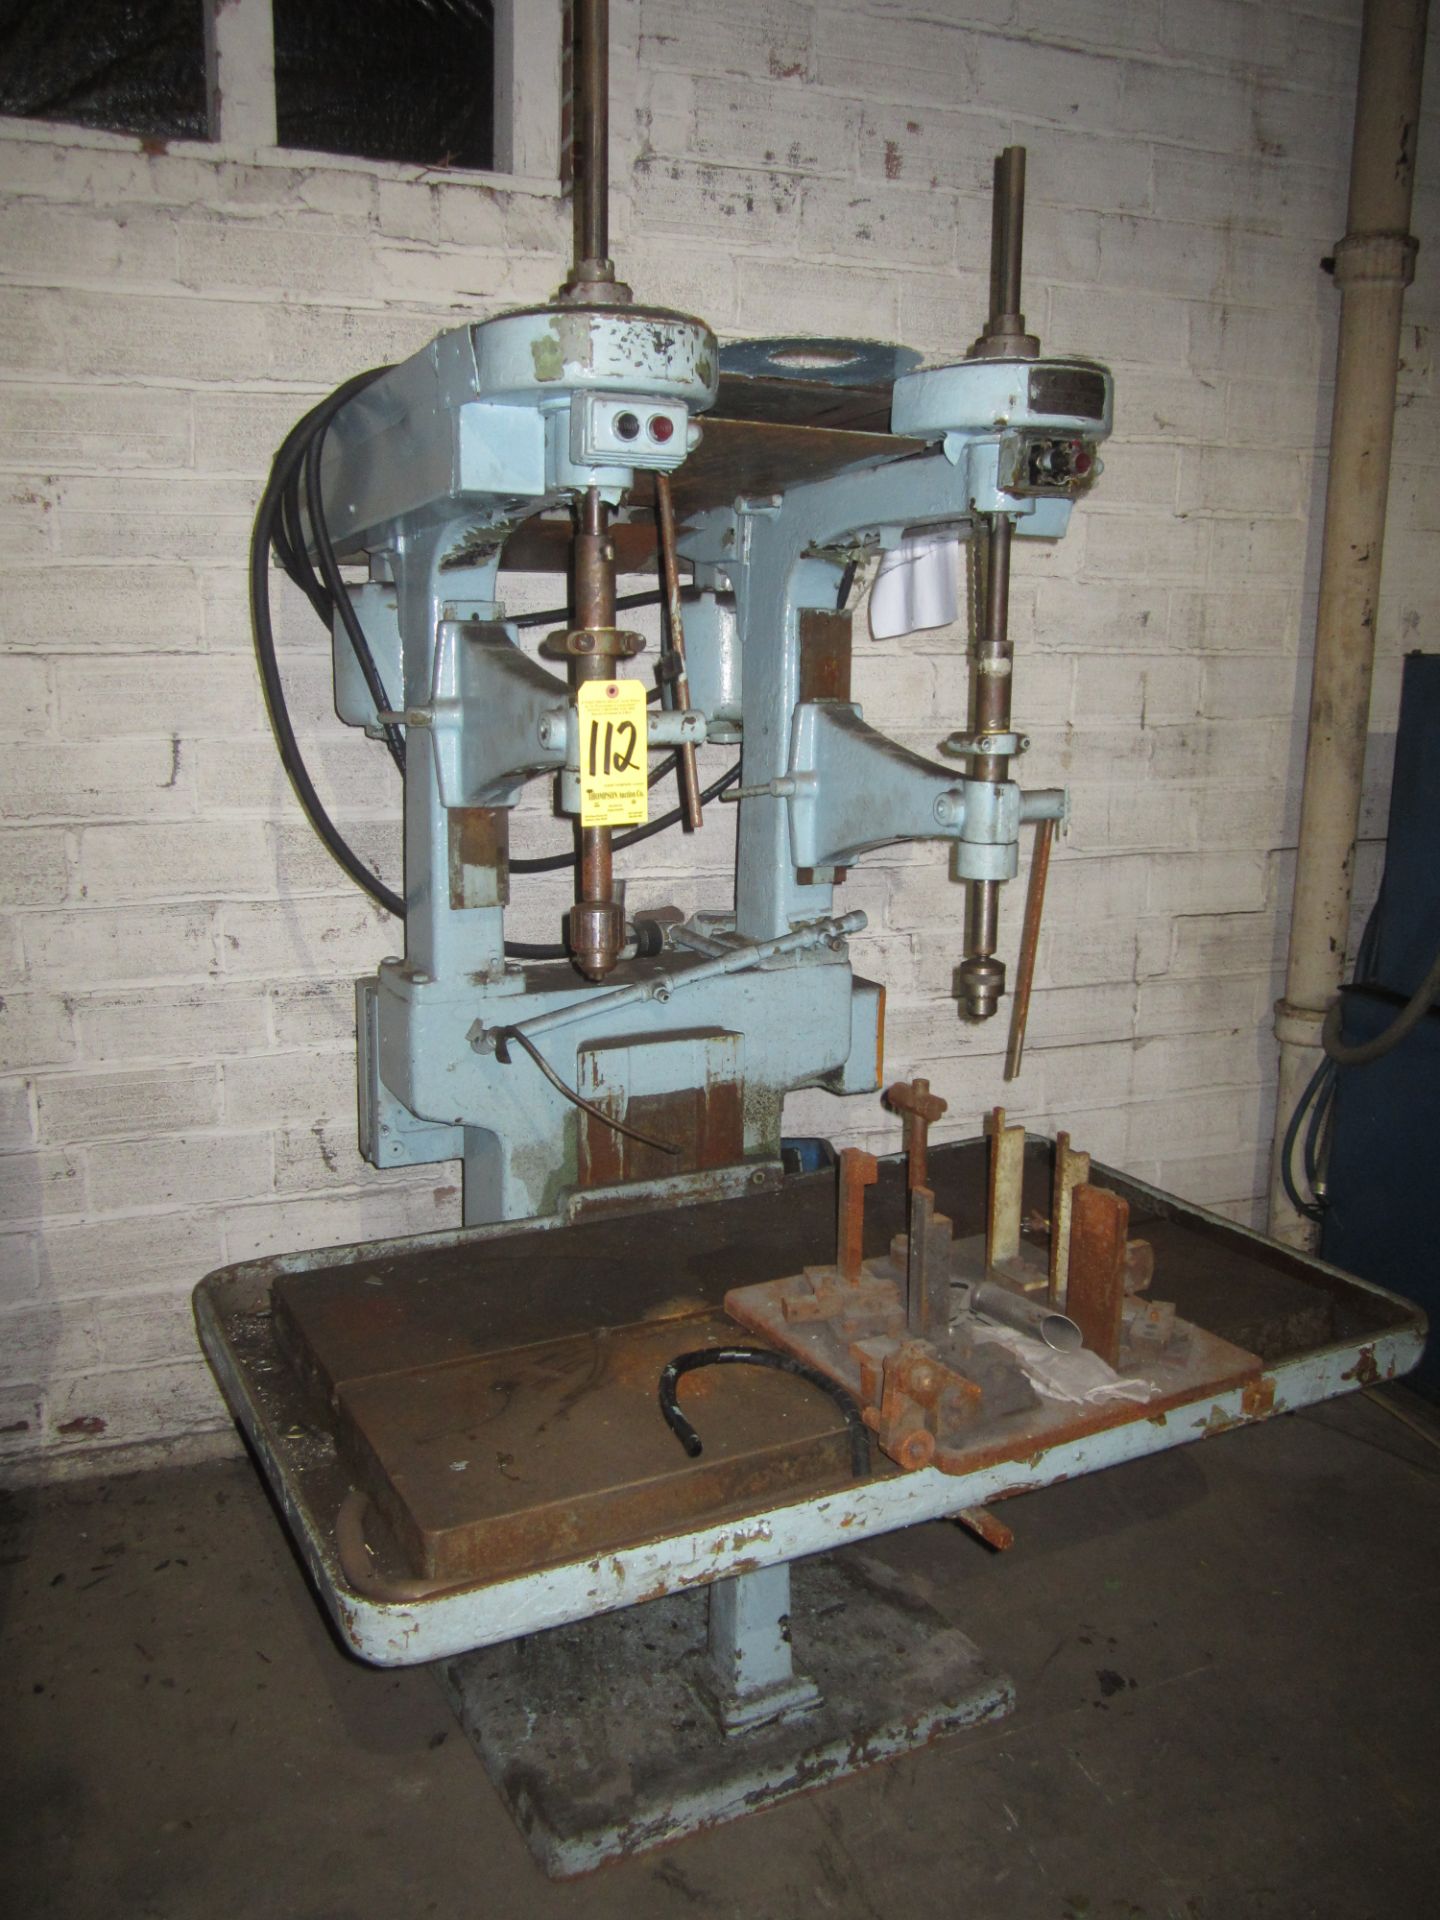 2-Spindle Drill Press with Production Table, Loading Fee $50.00